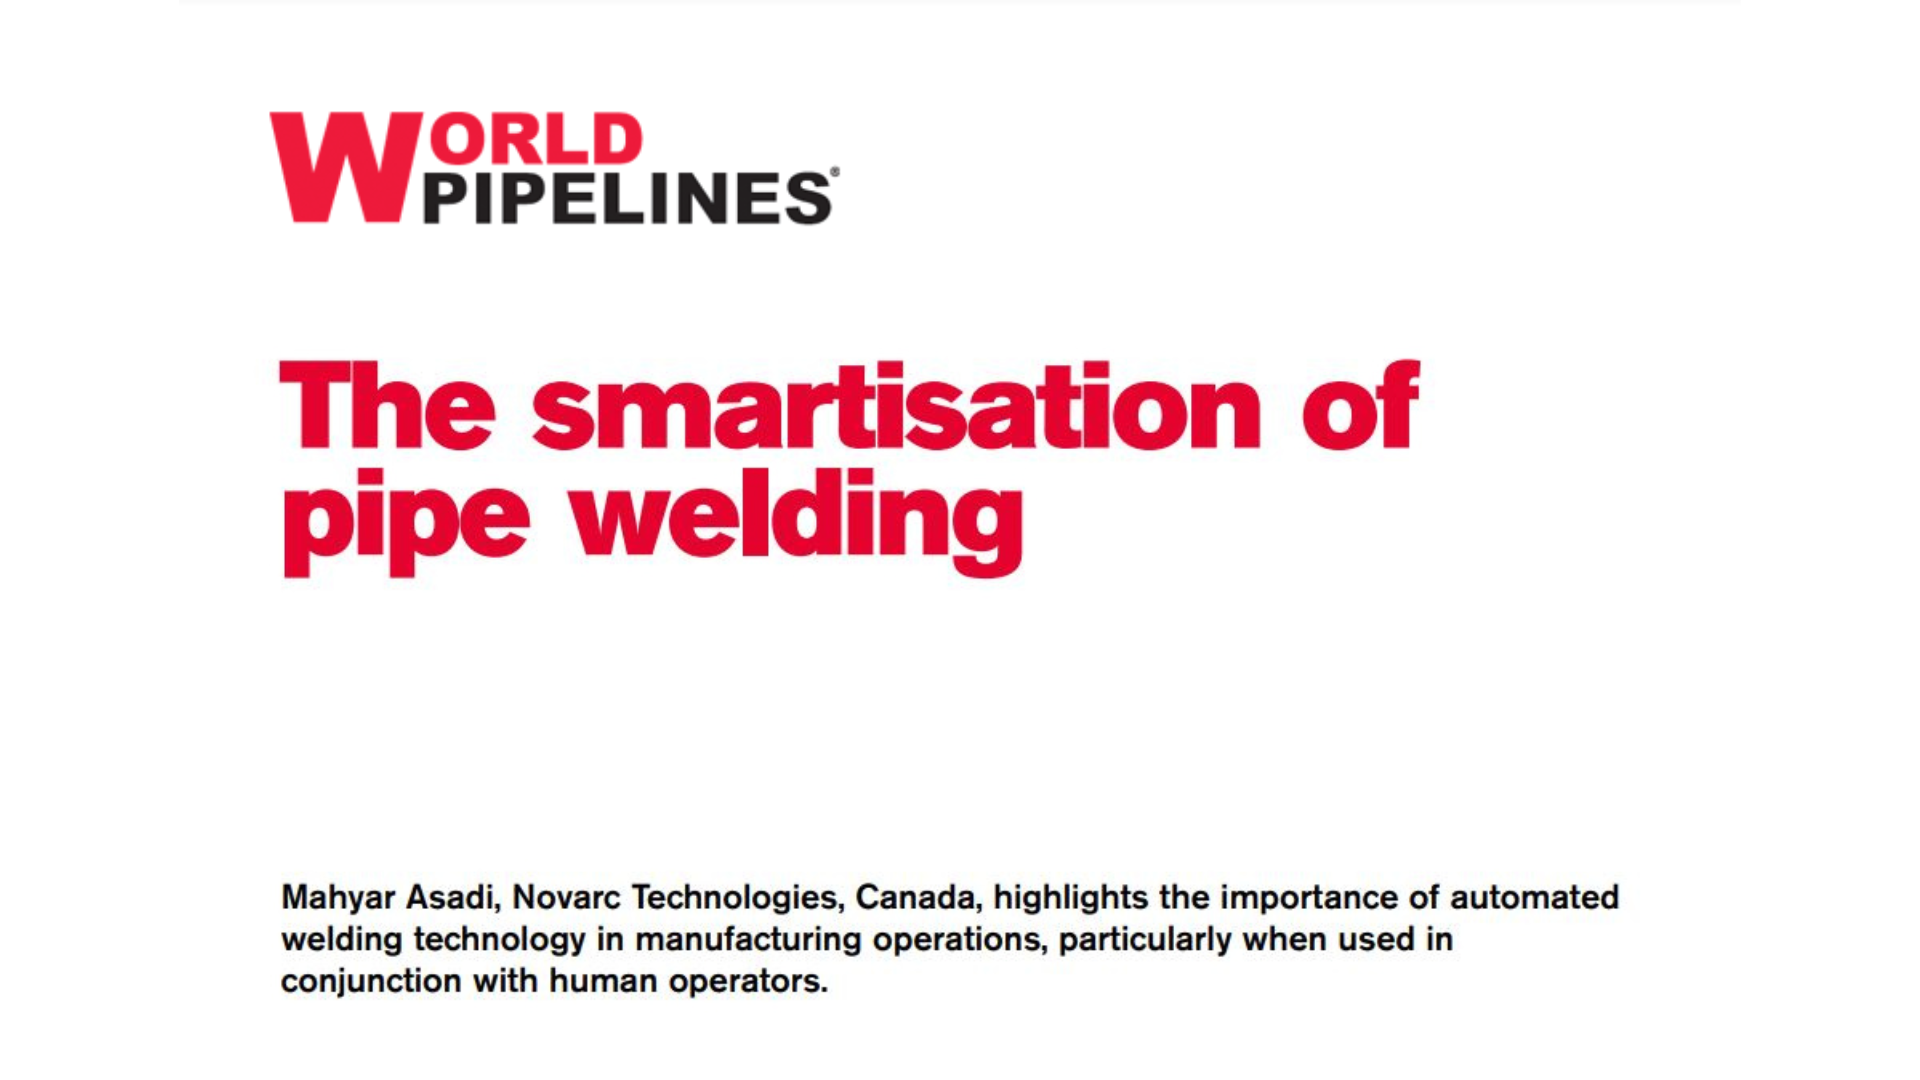 The Smartisation of Pipe Welding